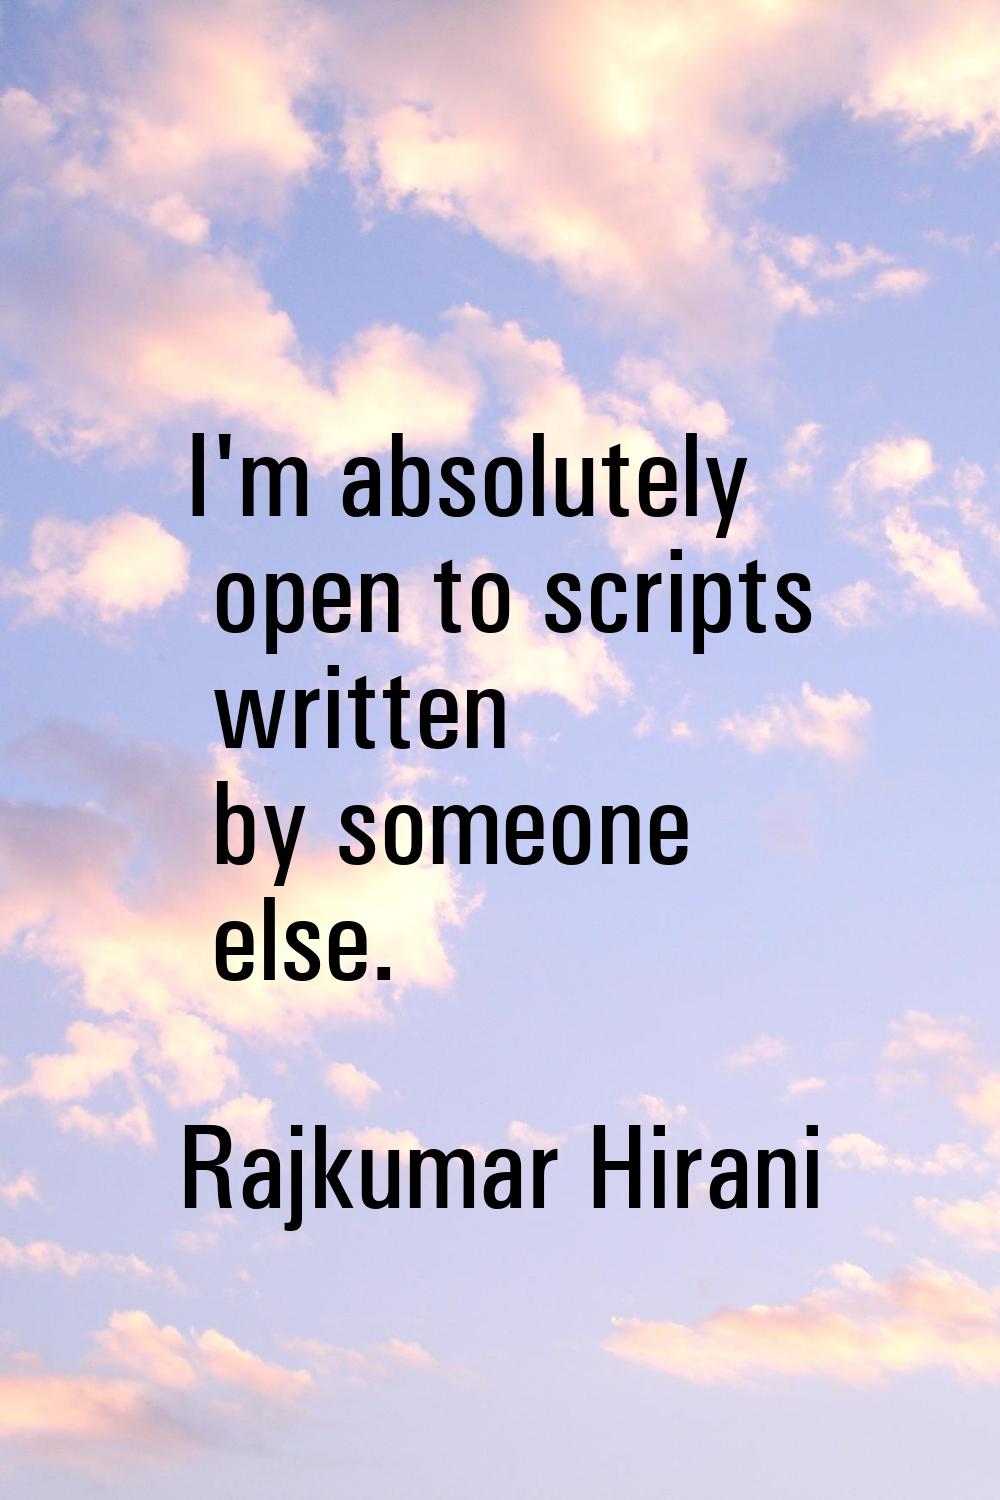 I'm absolutely open to scripts written by someone else.